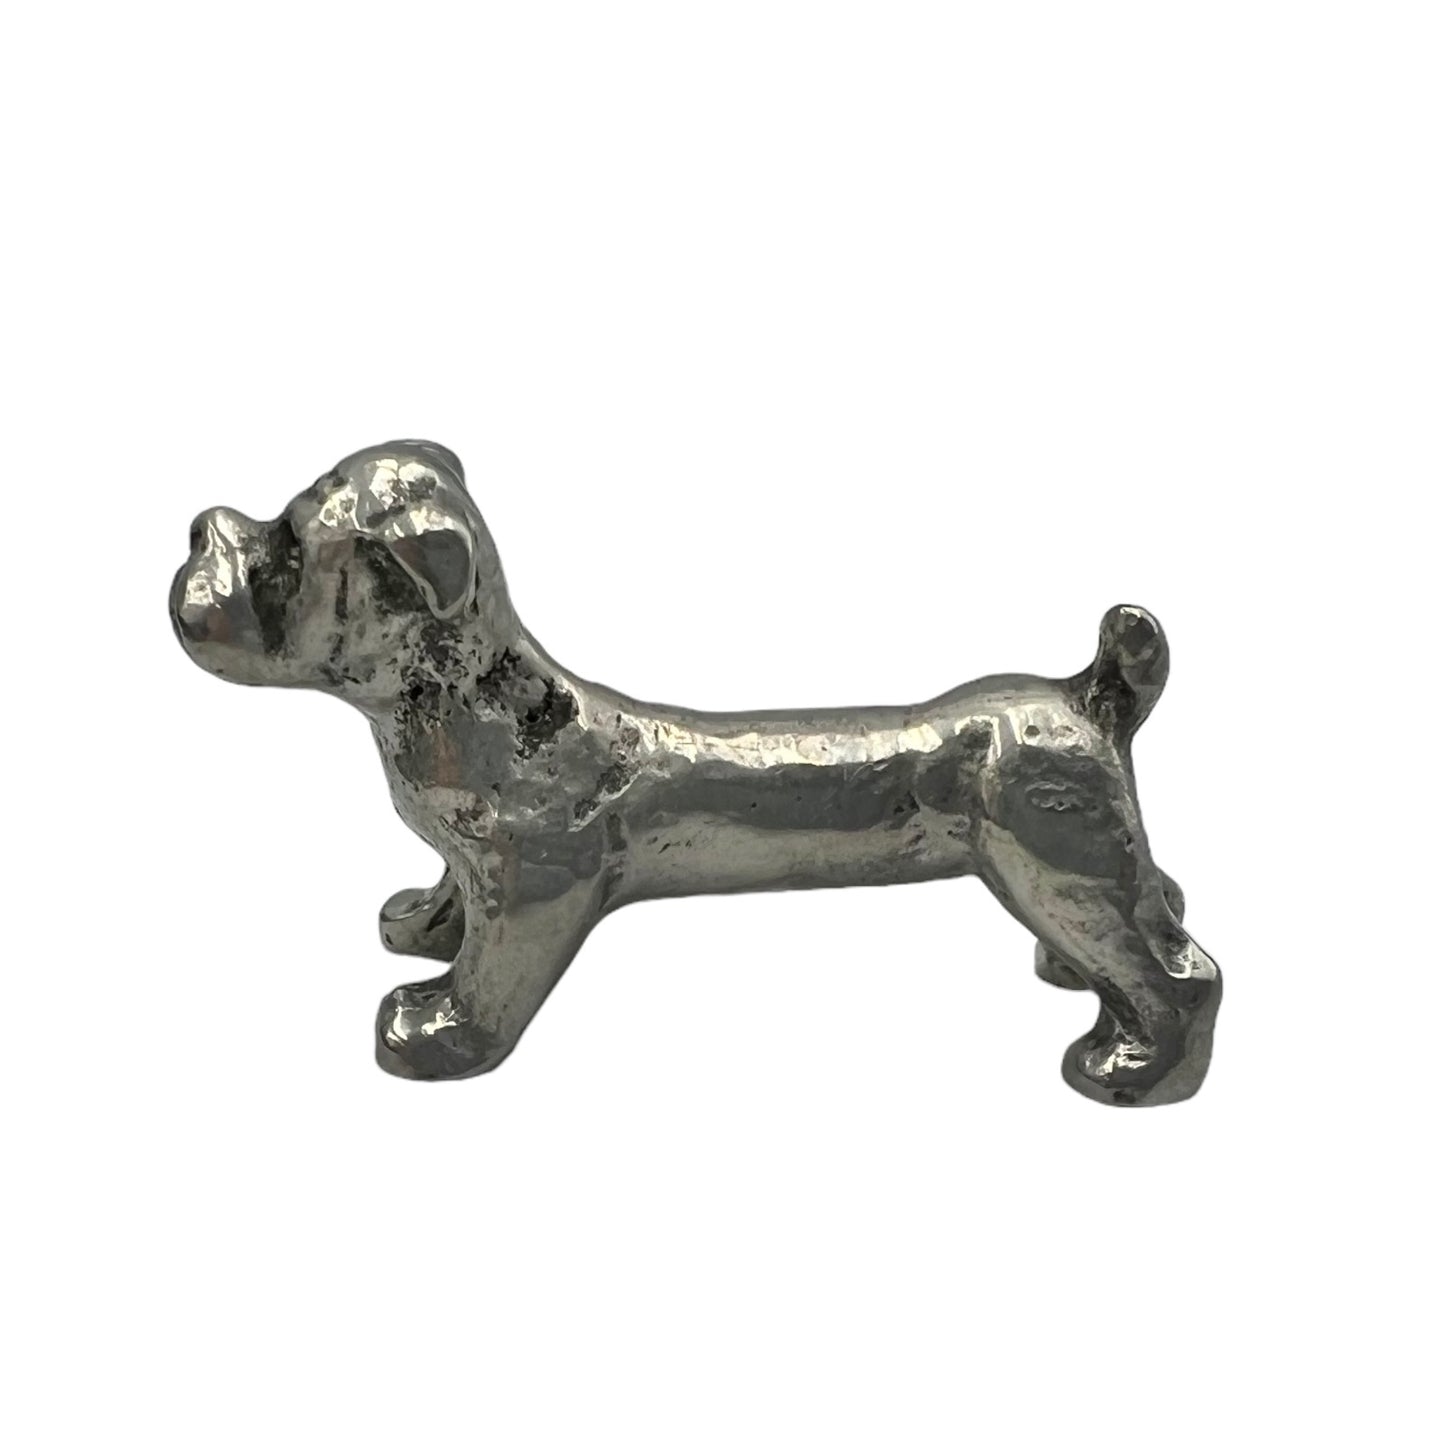 Set of 6 French dog shaped knife cutlery rests in original box